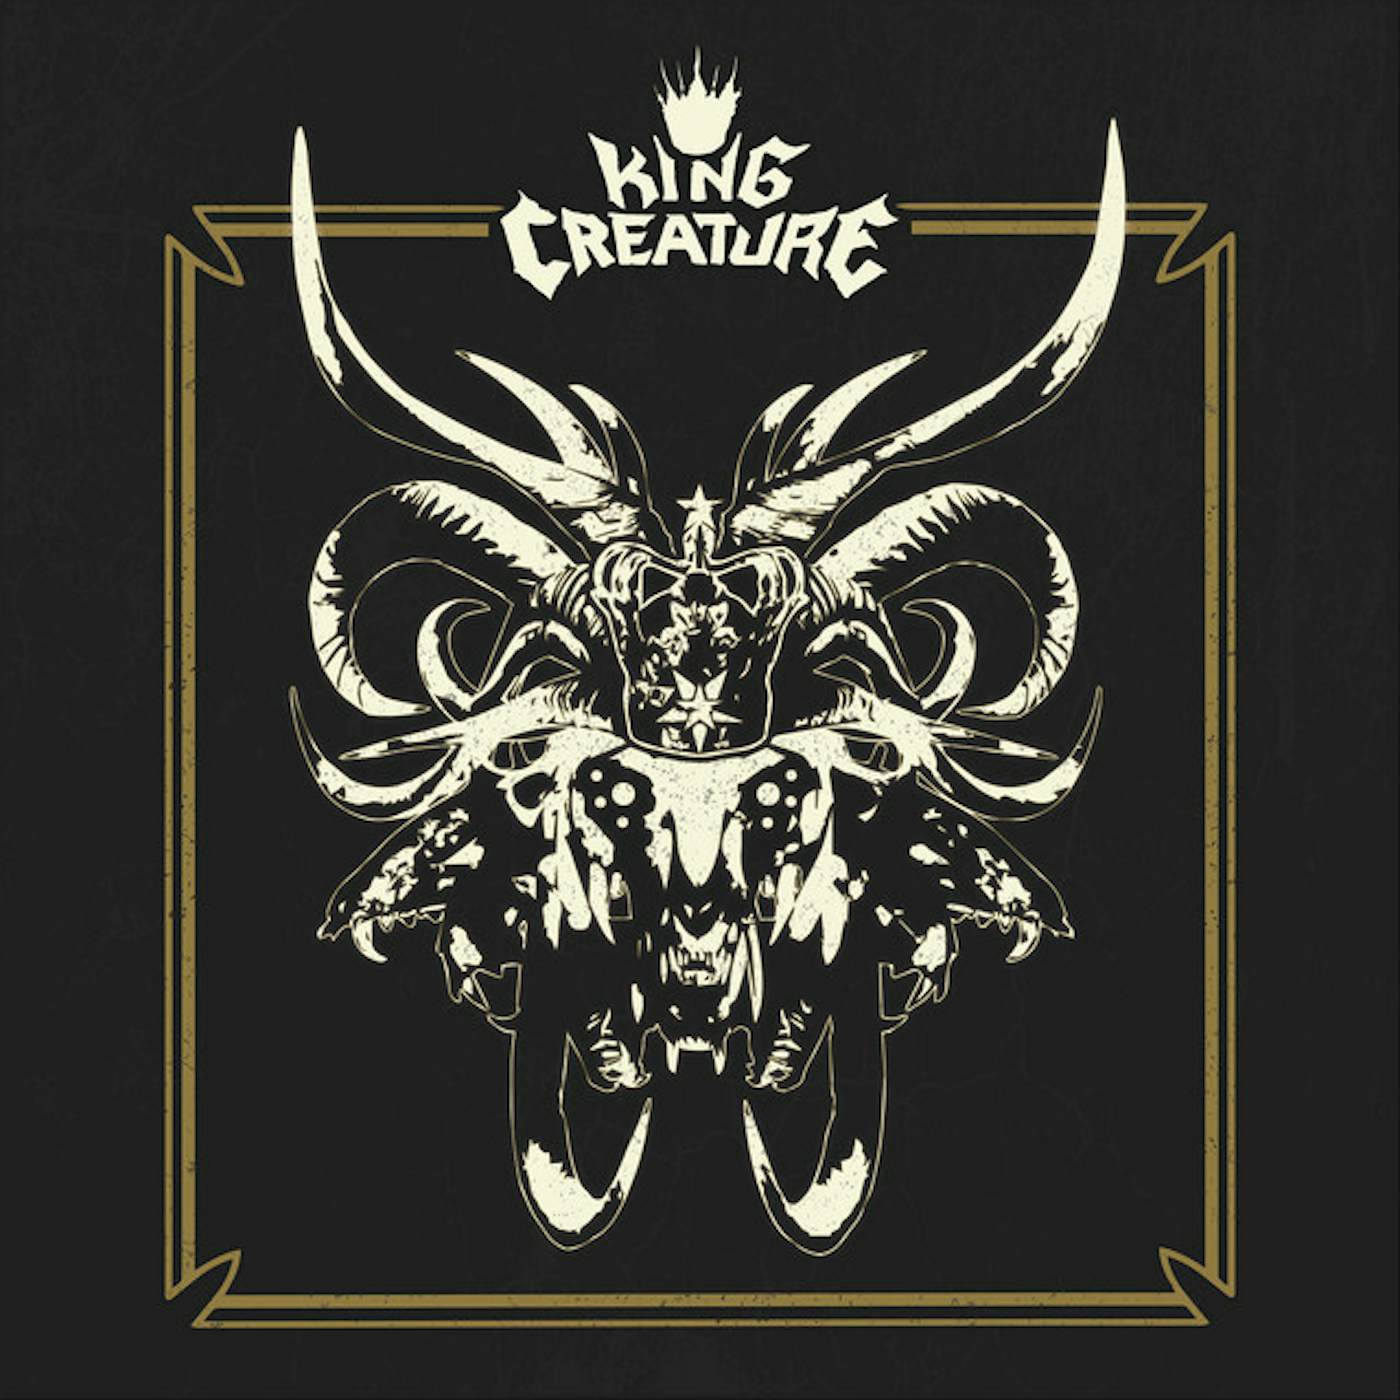 King Creature Set The World On Fire Vinyl Record